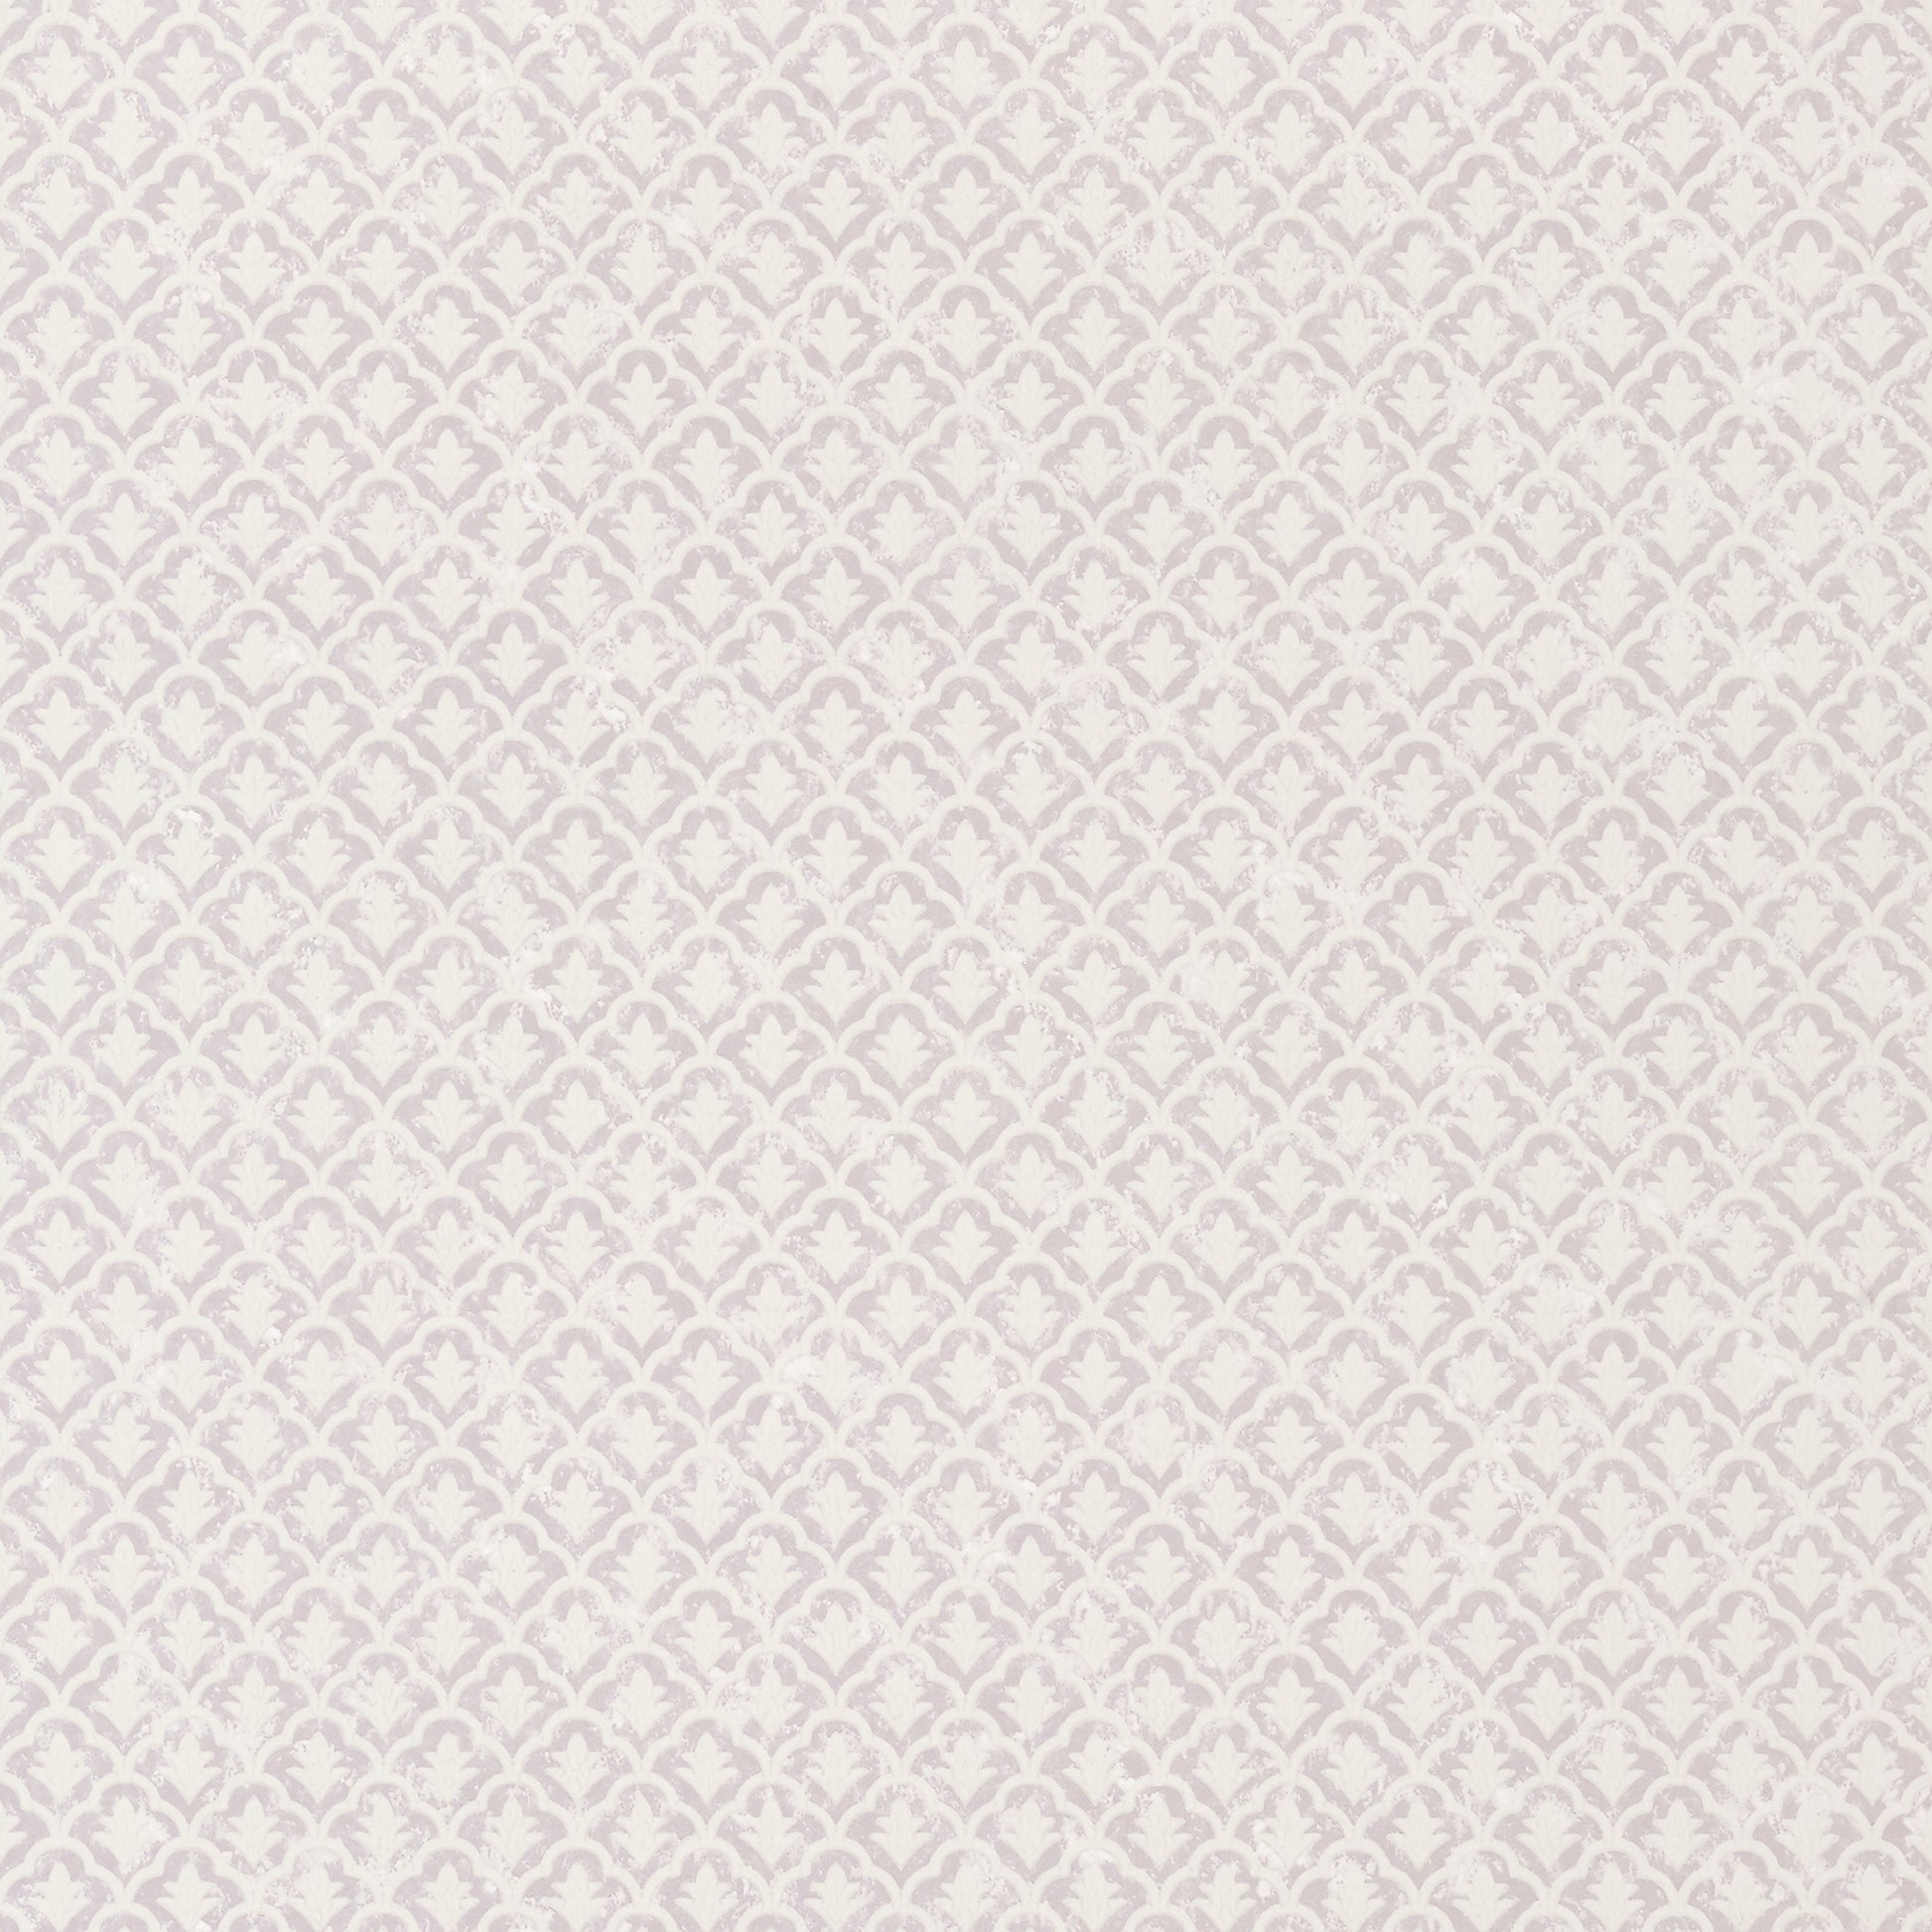 Purchase  Ann French Wallpaper Product# AT79139 pattern name  Fairfield